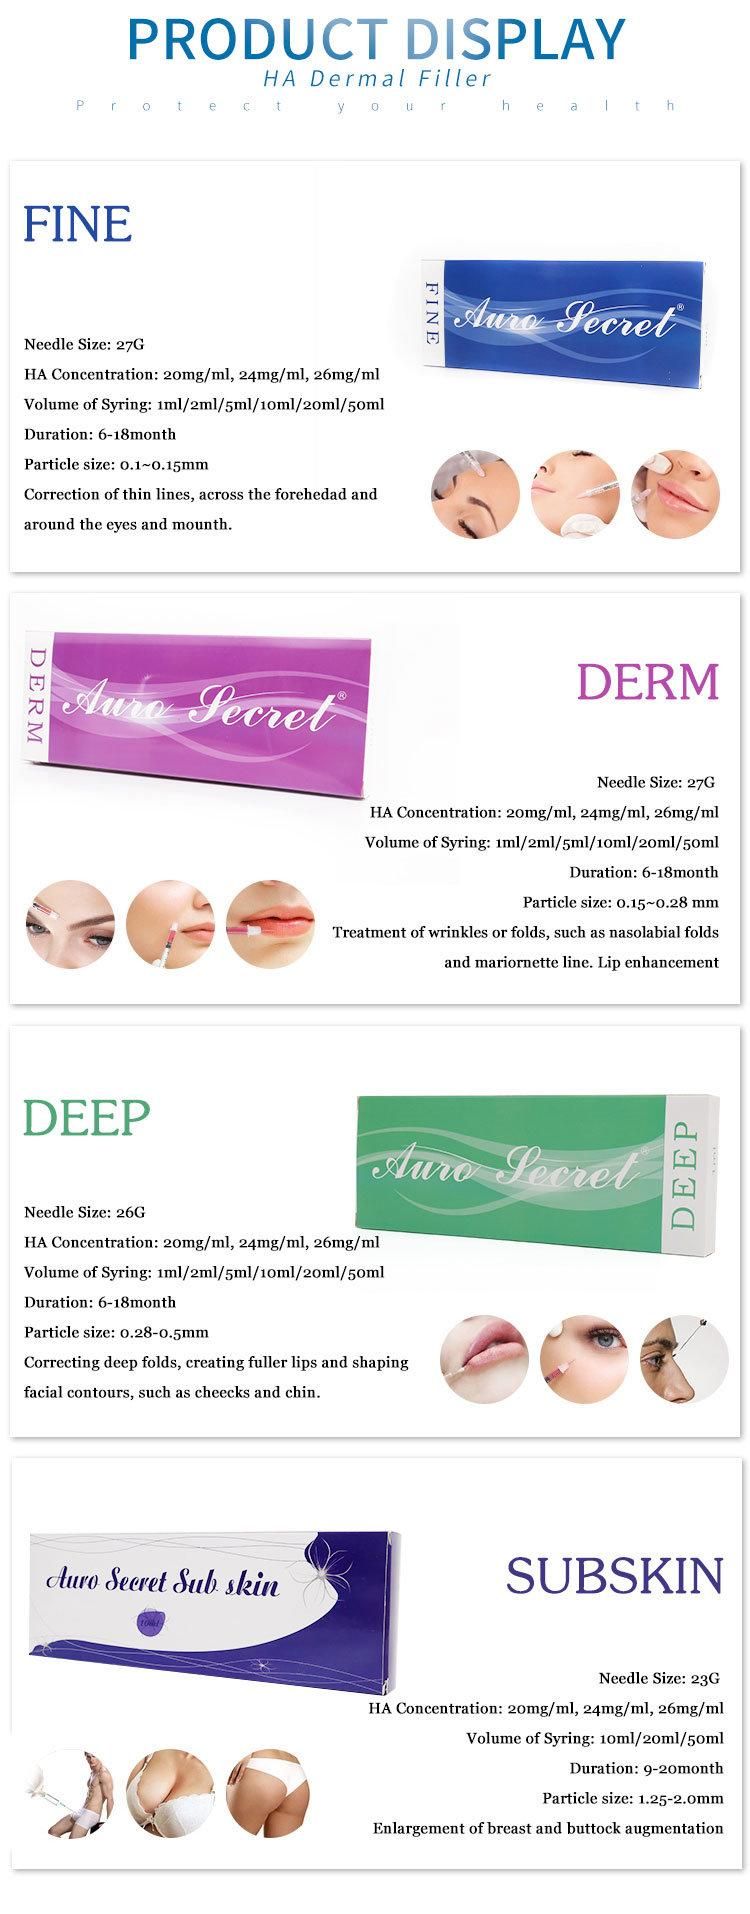 Buy Factory Approved CE Lip Injectable Dermal Fillers Ha Hyaluronic Acid Supplier